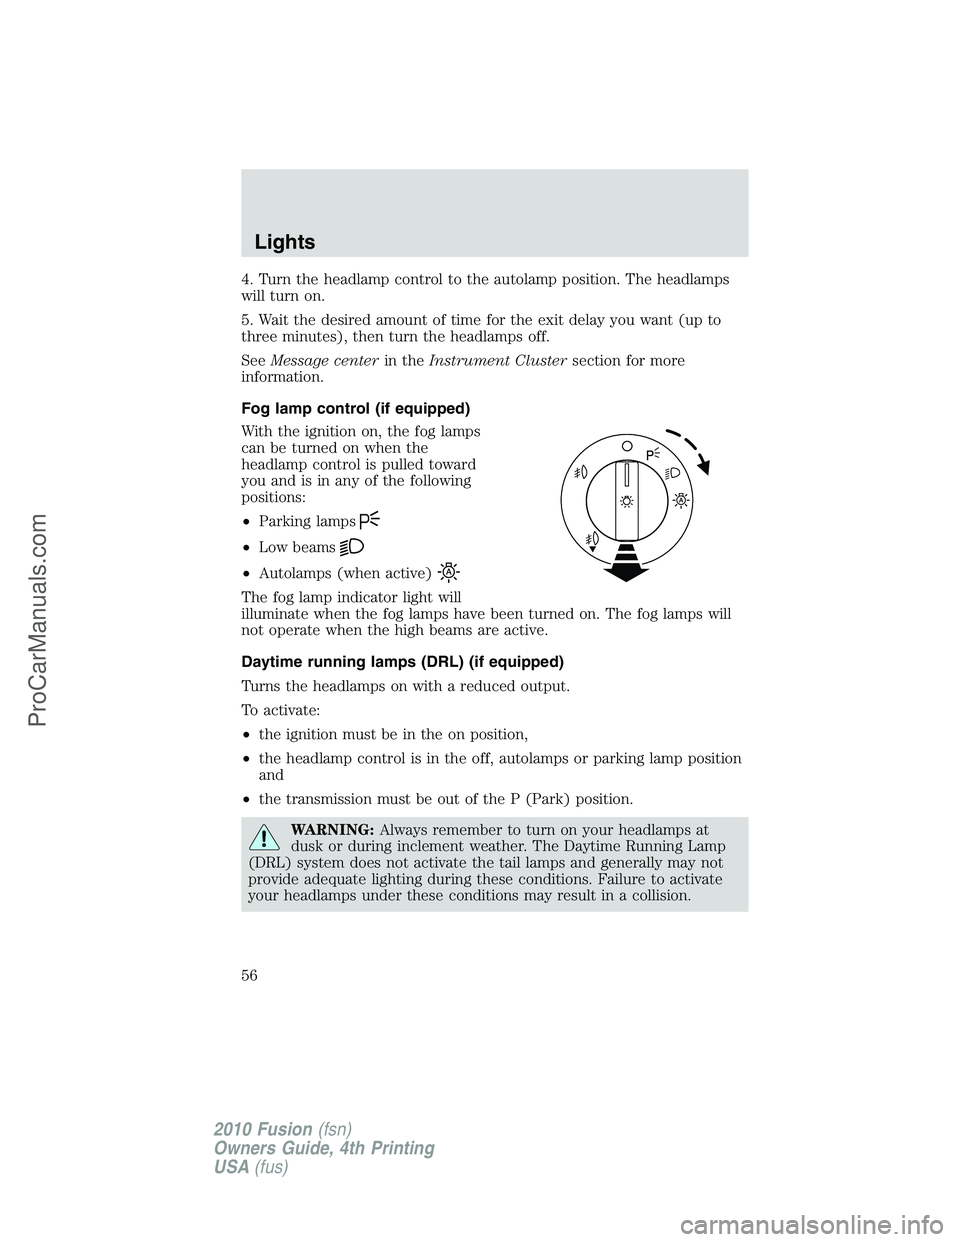 FORD FUSION 2010 Workshop Manual 4. Turn the headlamp control to the autolamp position. The headlamps
will turn on.
5. Wait the desired amount of time for the exit delay you want (up to
three minutes), then turn the headlamps off.
Se